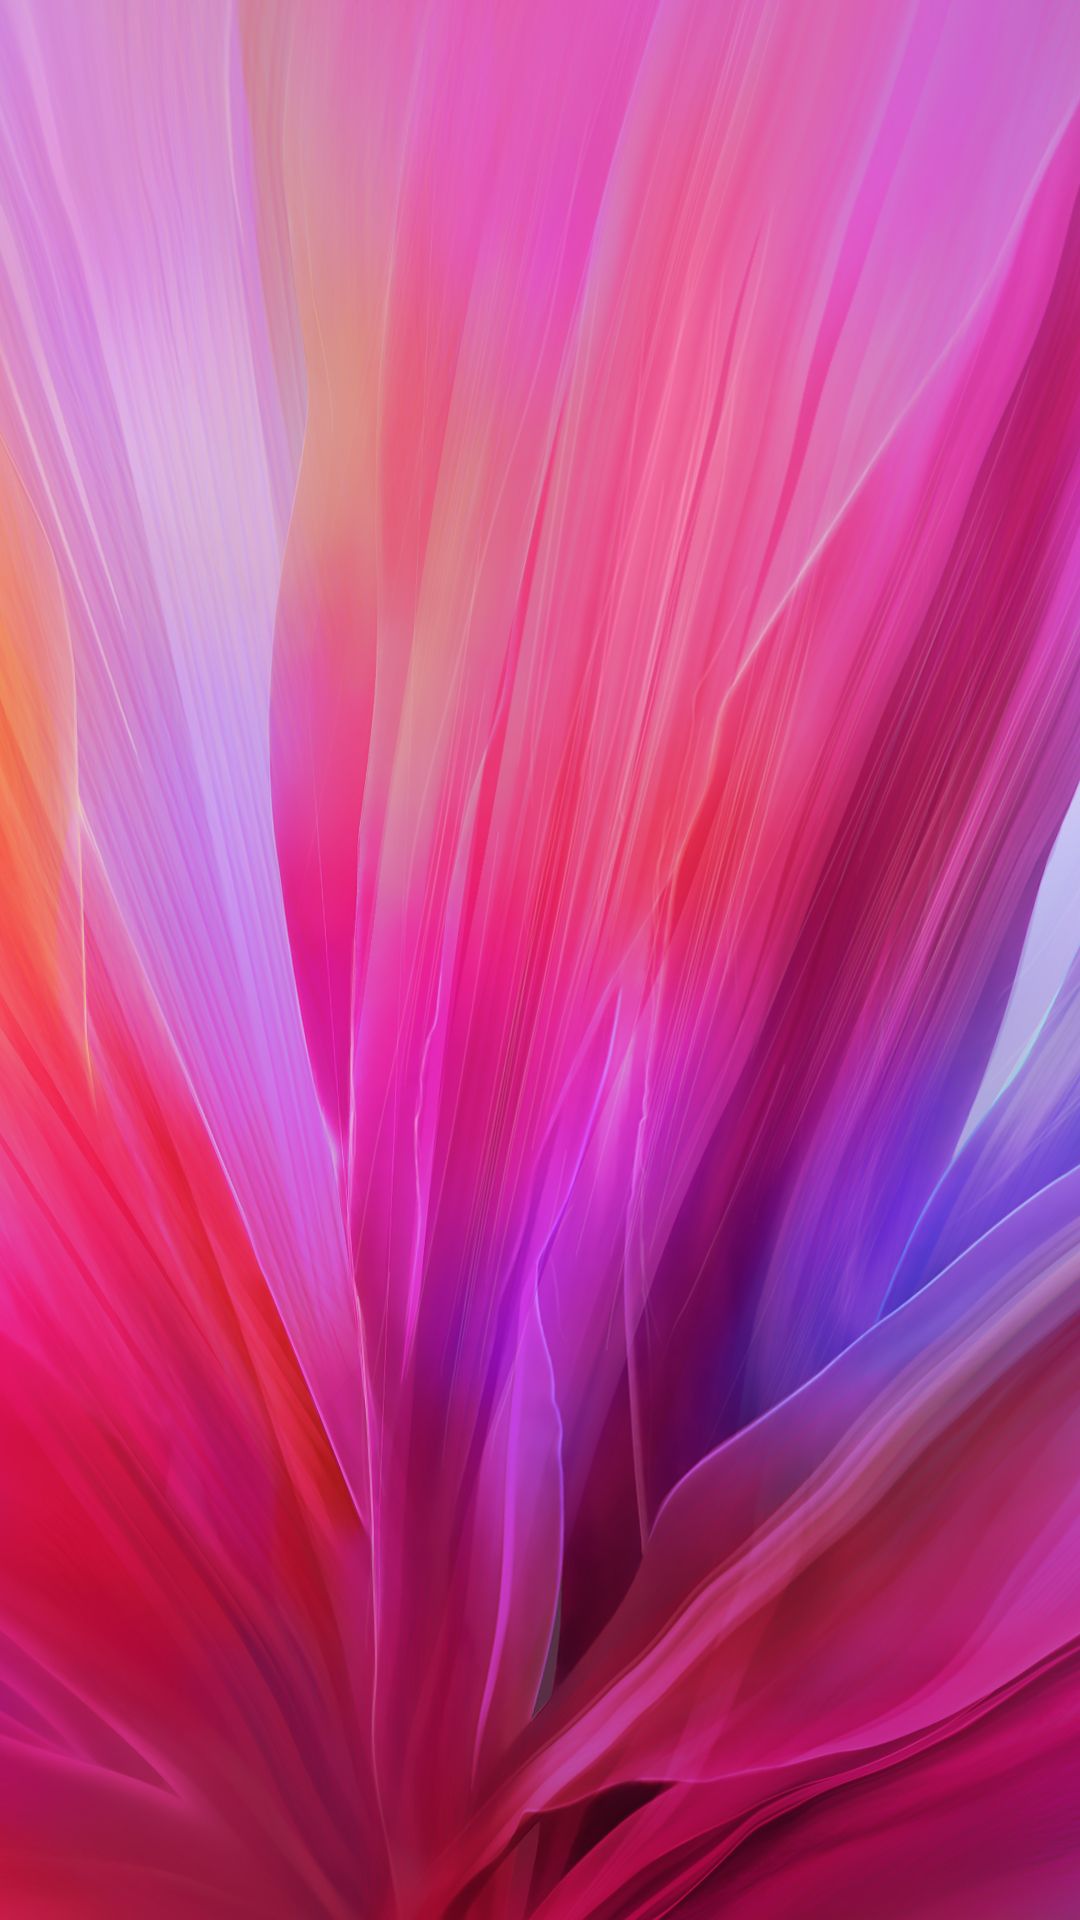 Sony Xperia Z5 Wallpaper With Abstract Colorful Background Hq